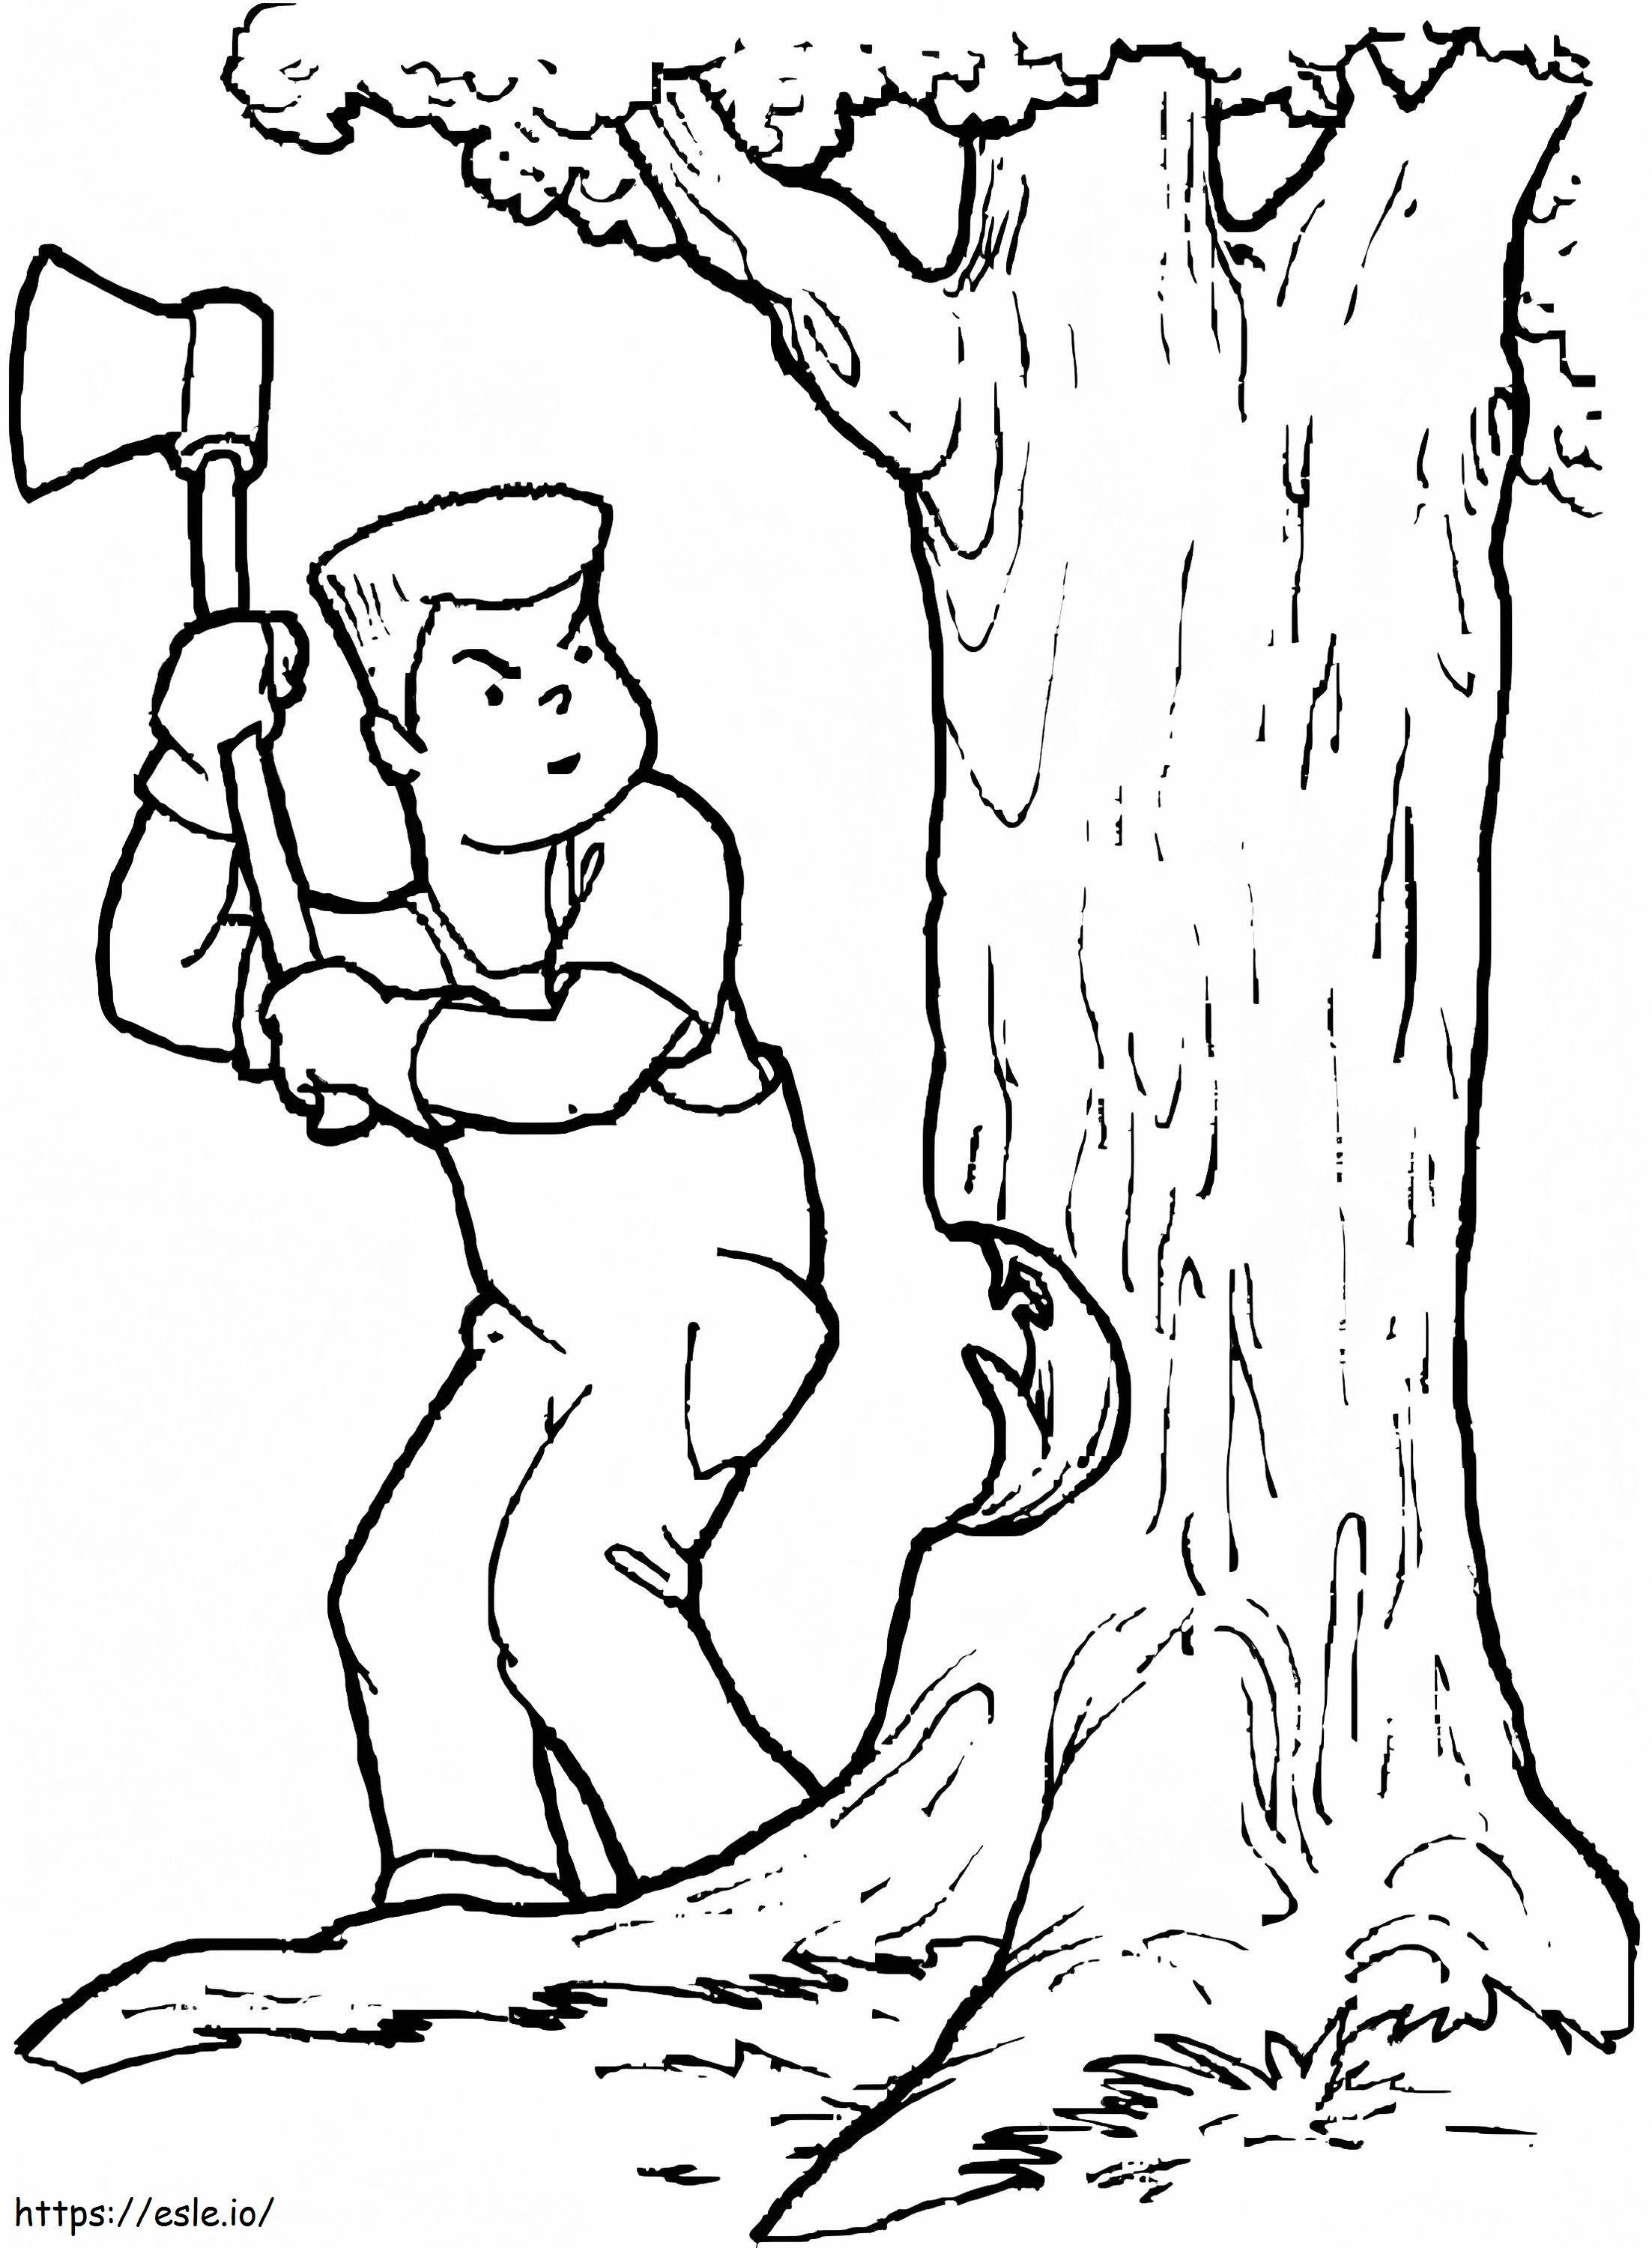 A Lumberjack coloring page